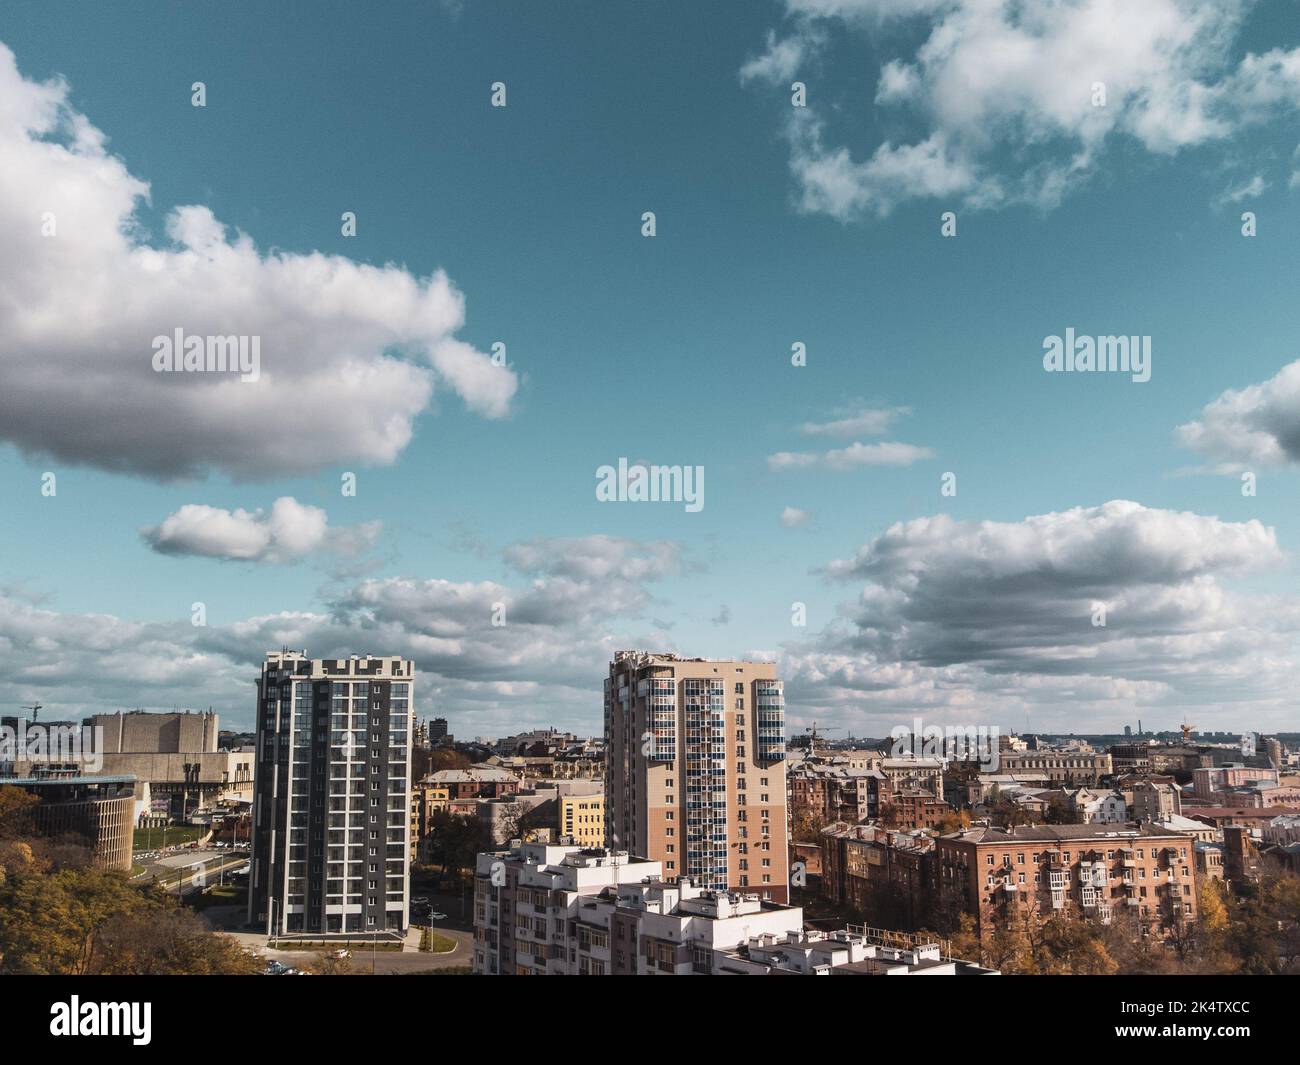 City aerial view, residential buildings in autumn with scenic cloudy blue sky, sunny downtown. Kharkiv, Ukraine Stock Photo